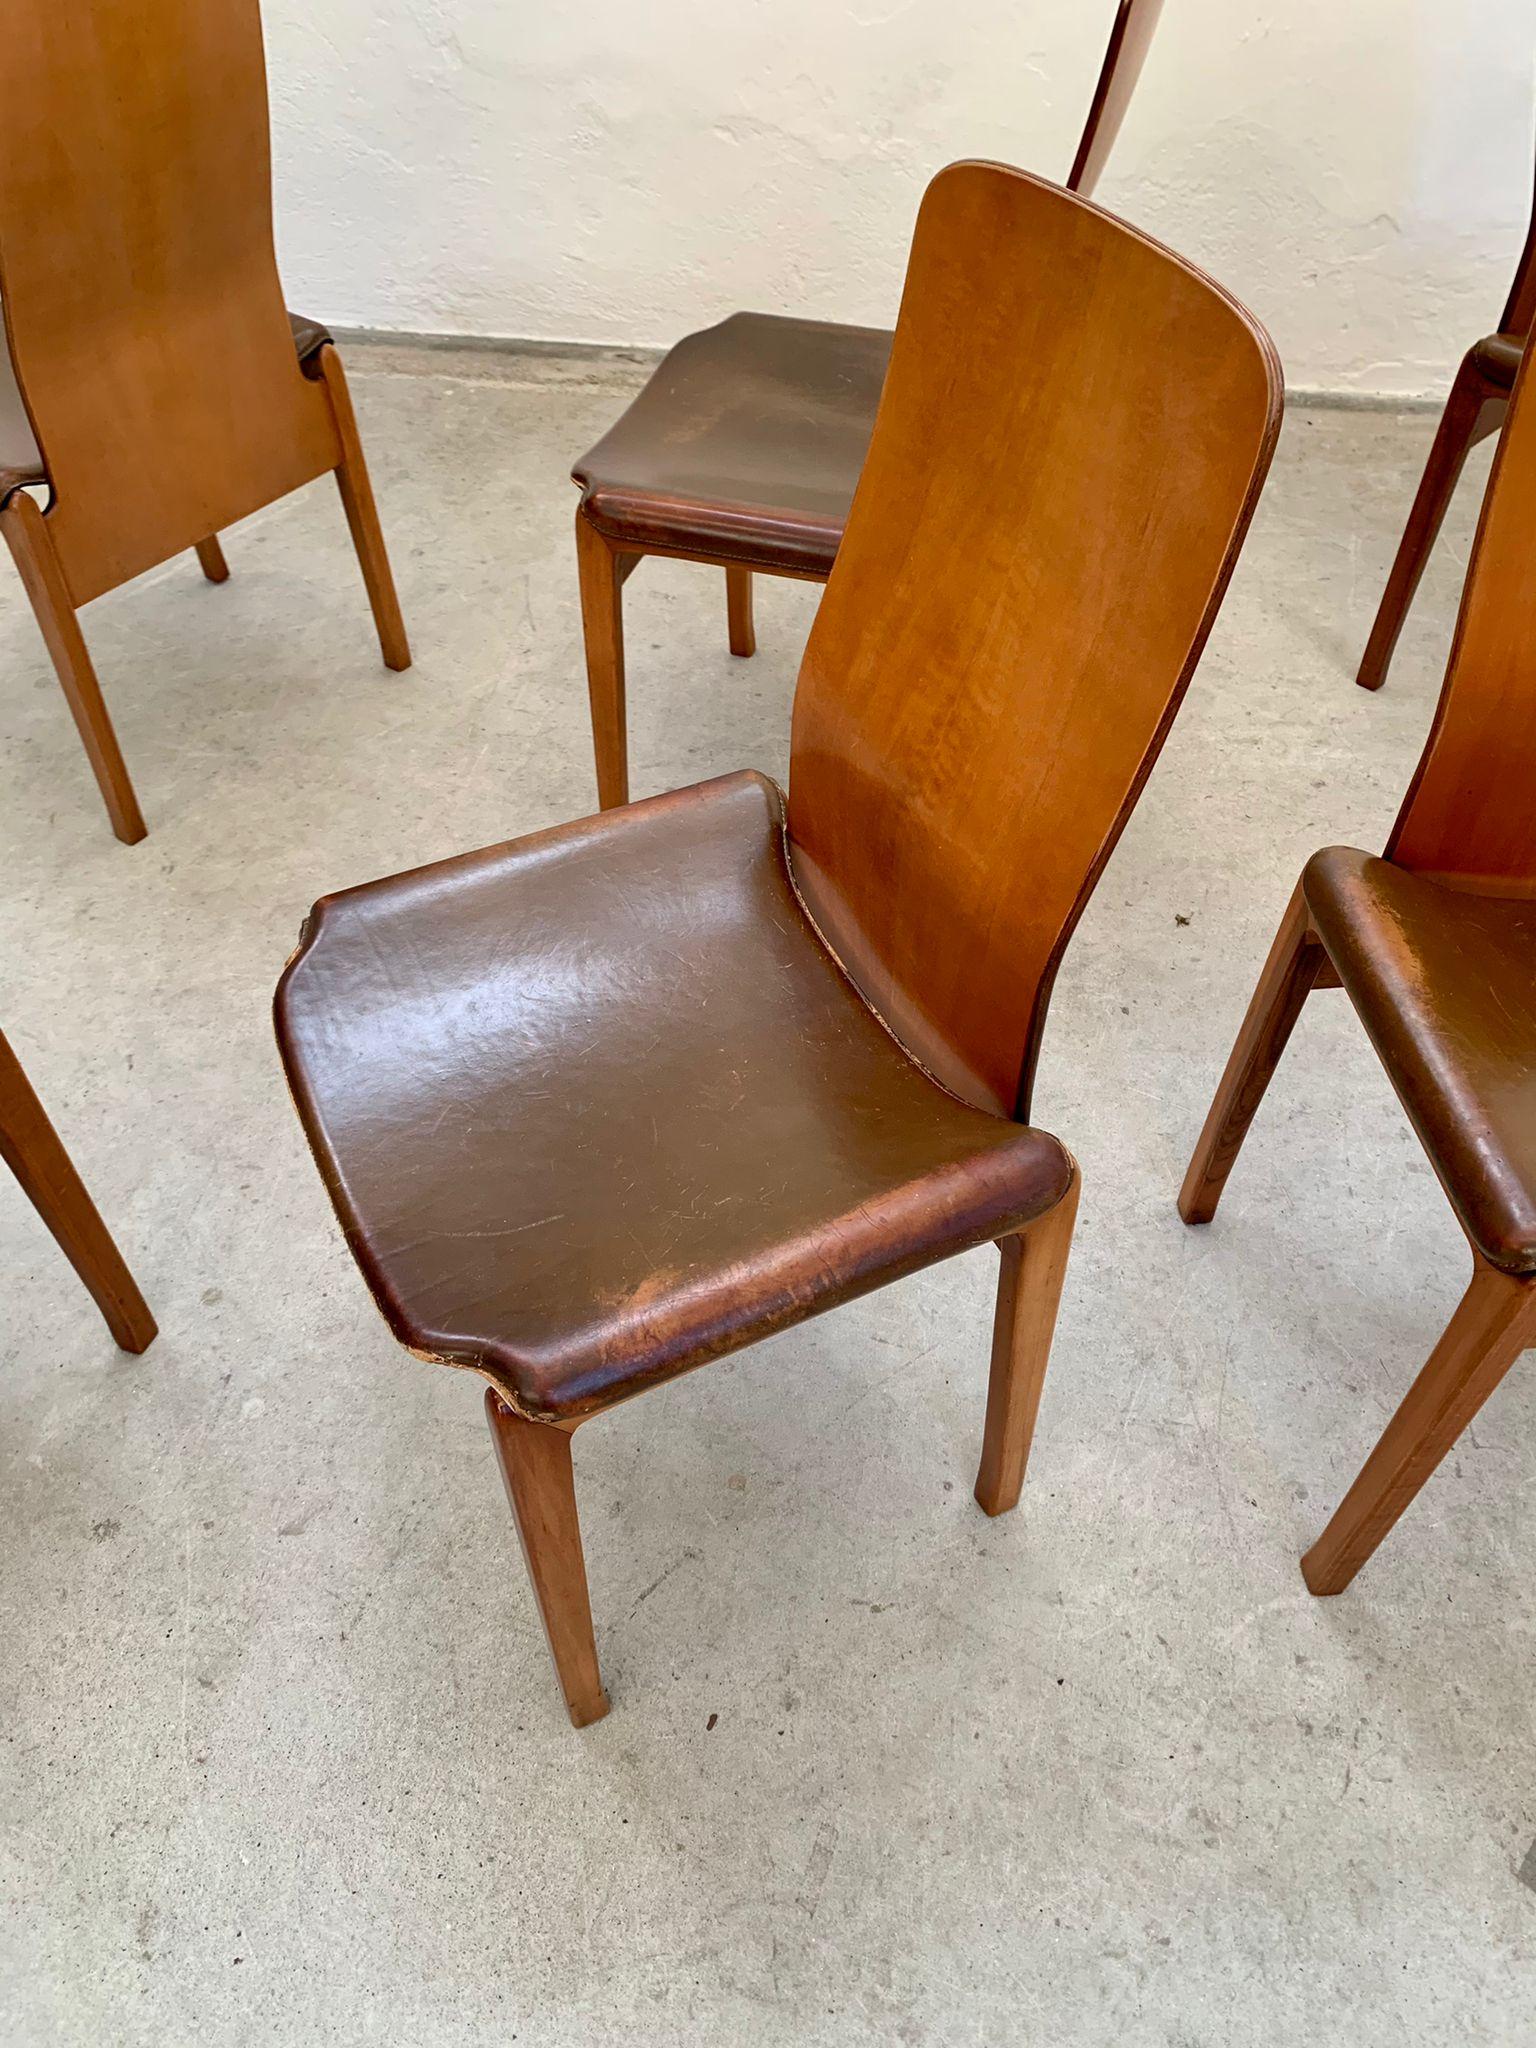 Mid-20th Century Set of Fiorenza chairs in wood and leather by Tito Agnoli for Molteni, 1968